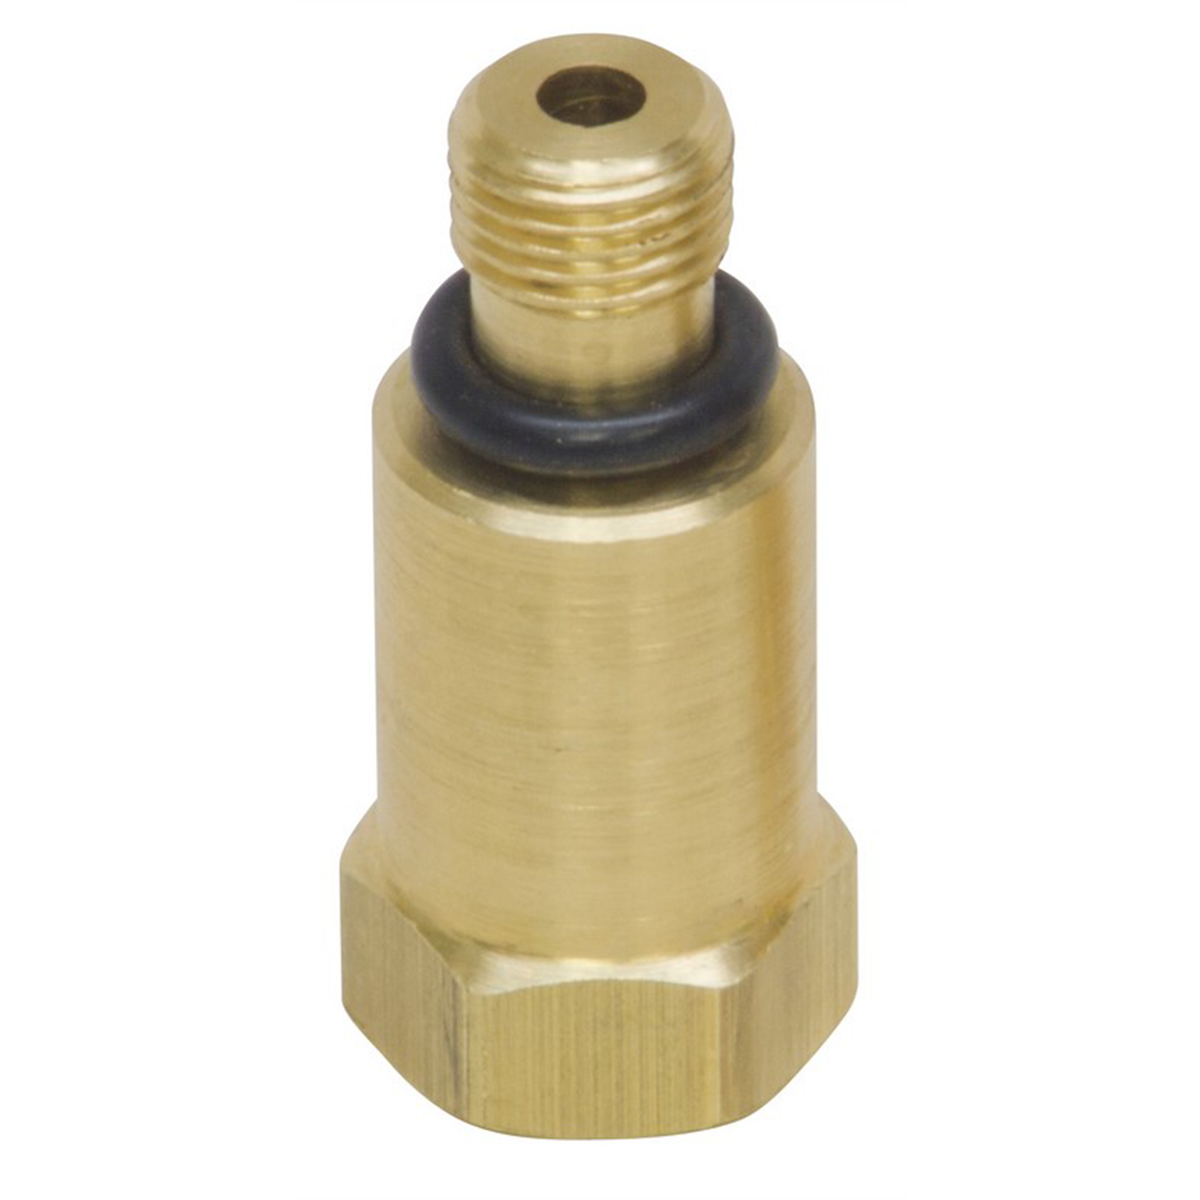 10mm Spark Plug Adapter for 20250